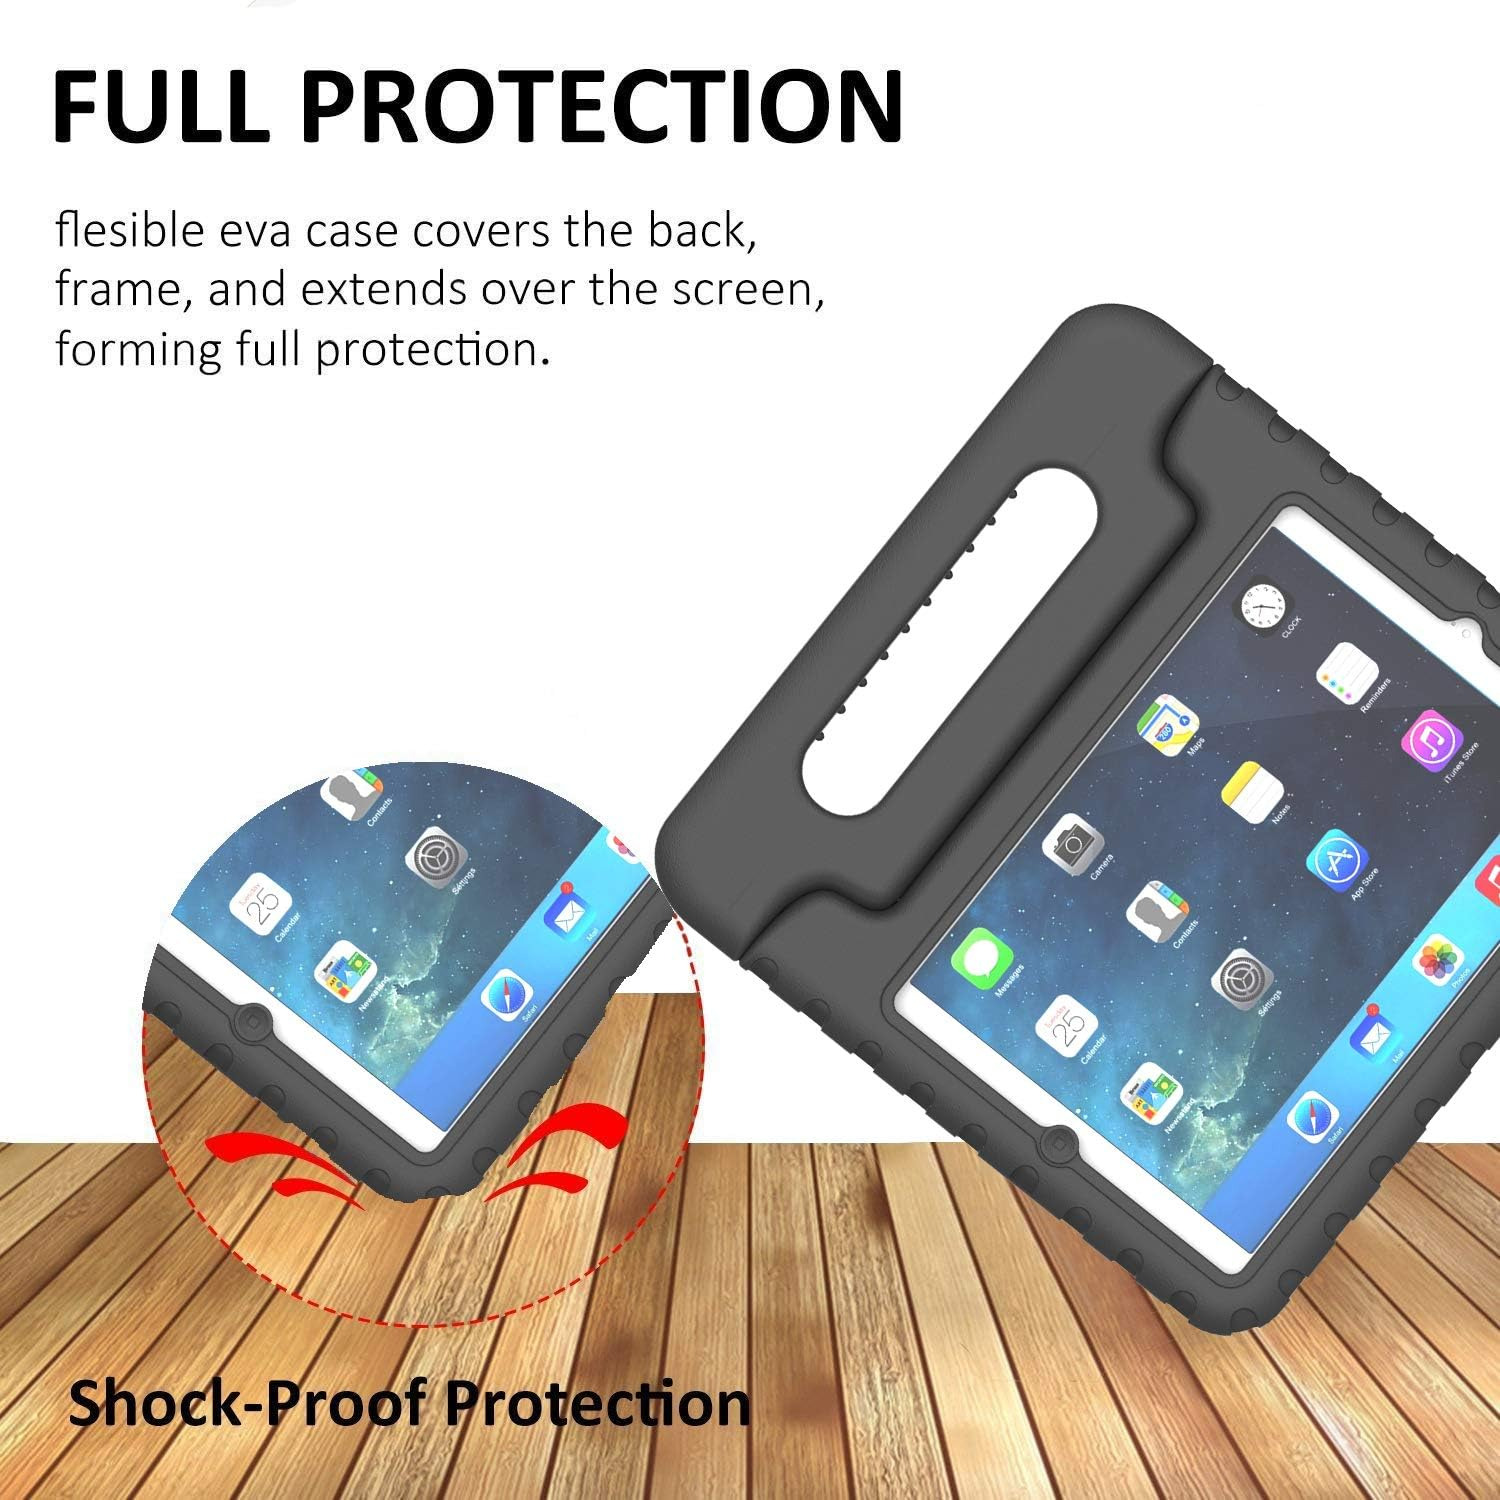 Kids Case Compatible for Ipad Mini 1 2 3 - Light Weight Shock Proof Handle Stand